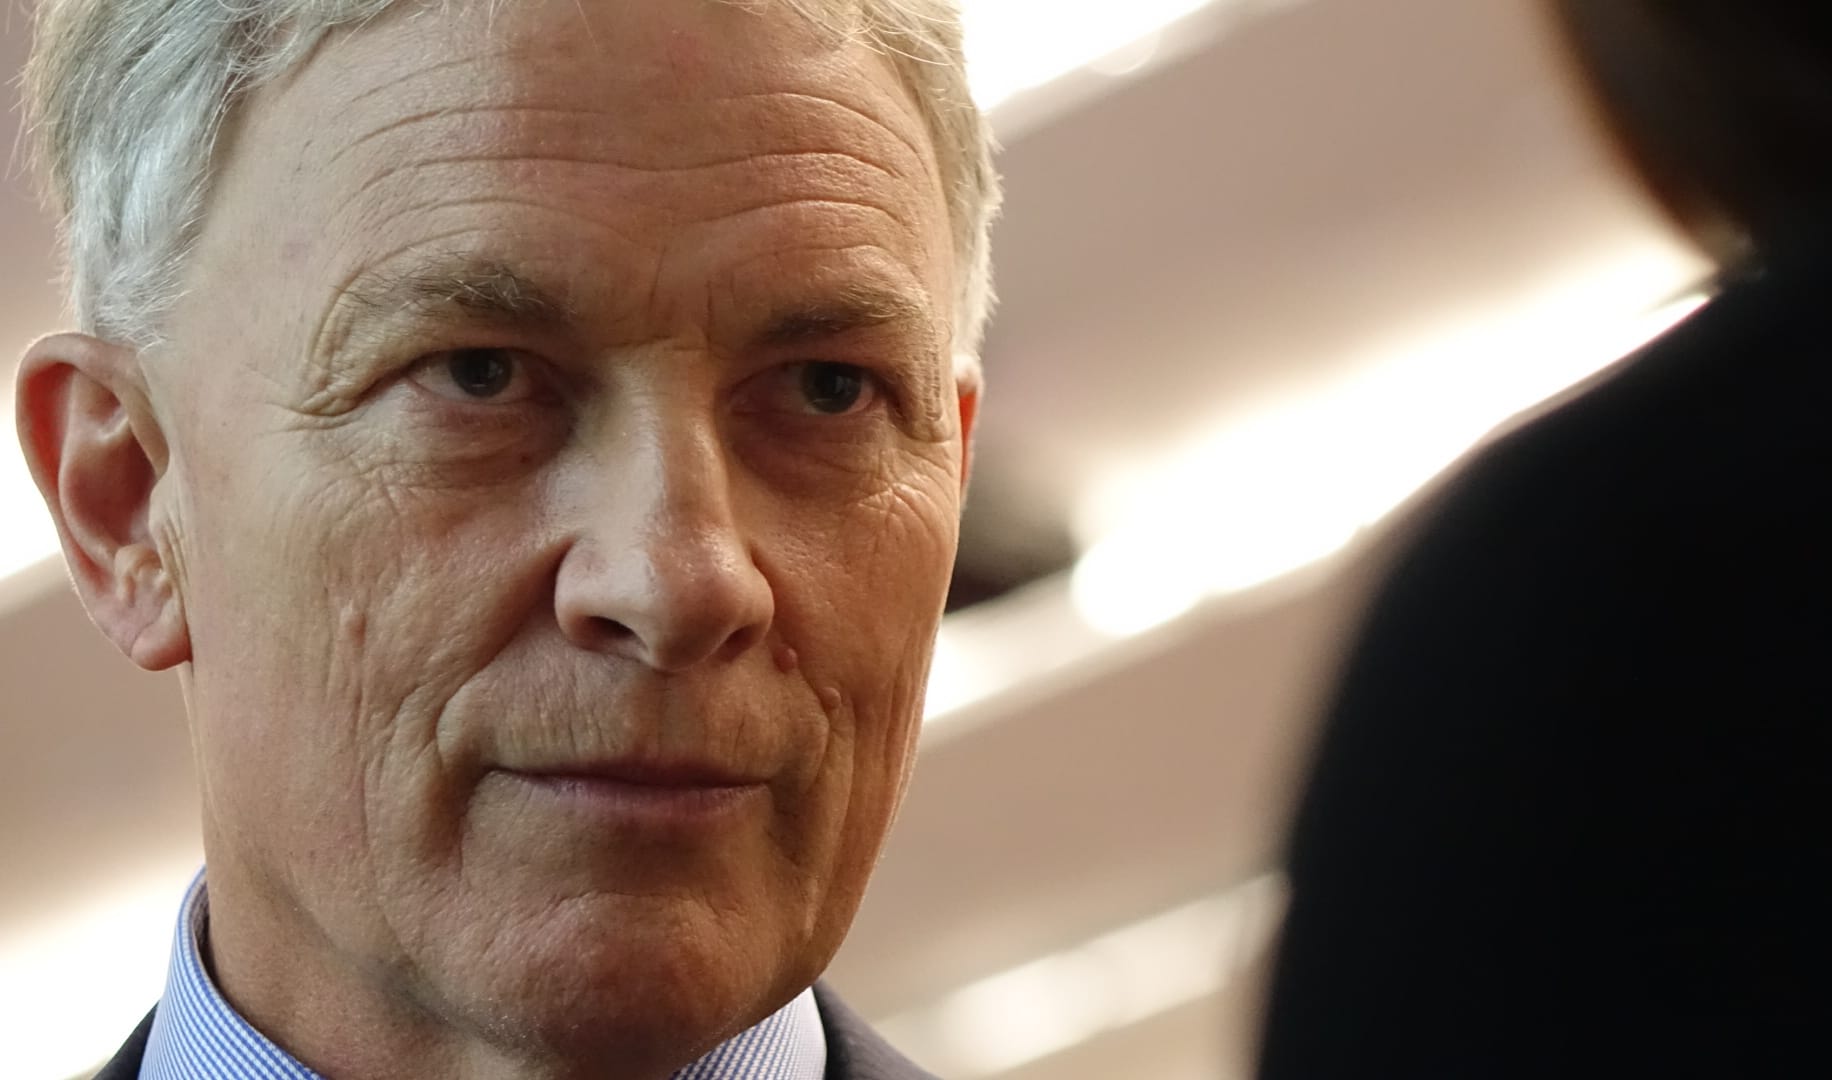 Phil Goff was among those to attend a meeting at the University of Auckland on 1 April 2016 after a series of violent attacks on international students.